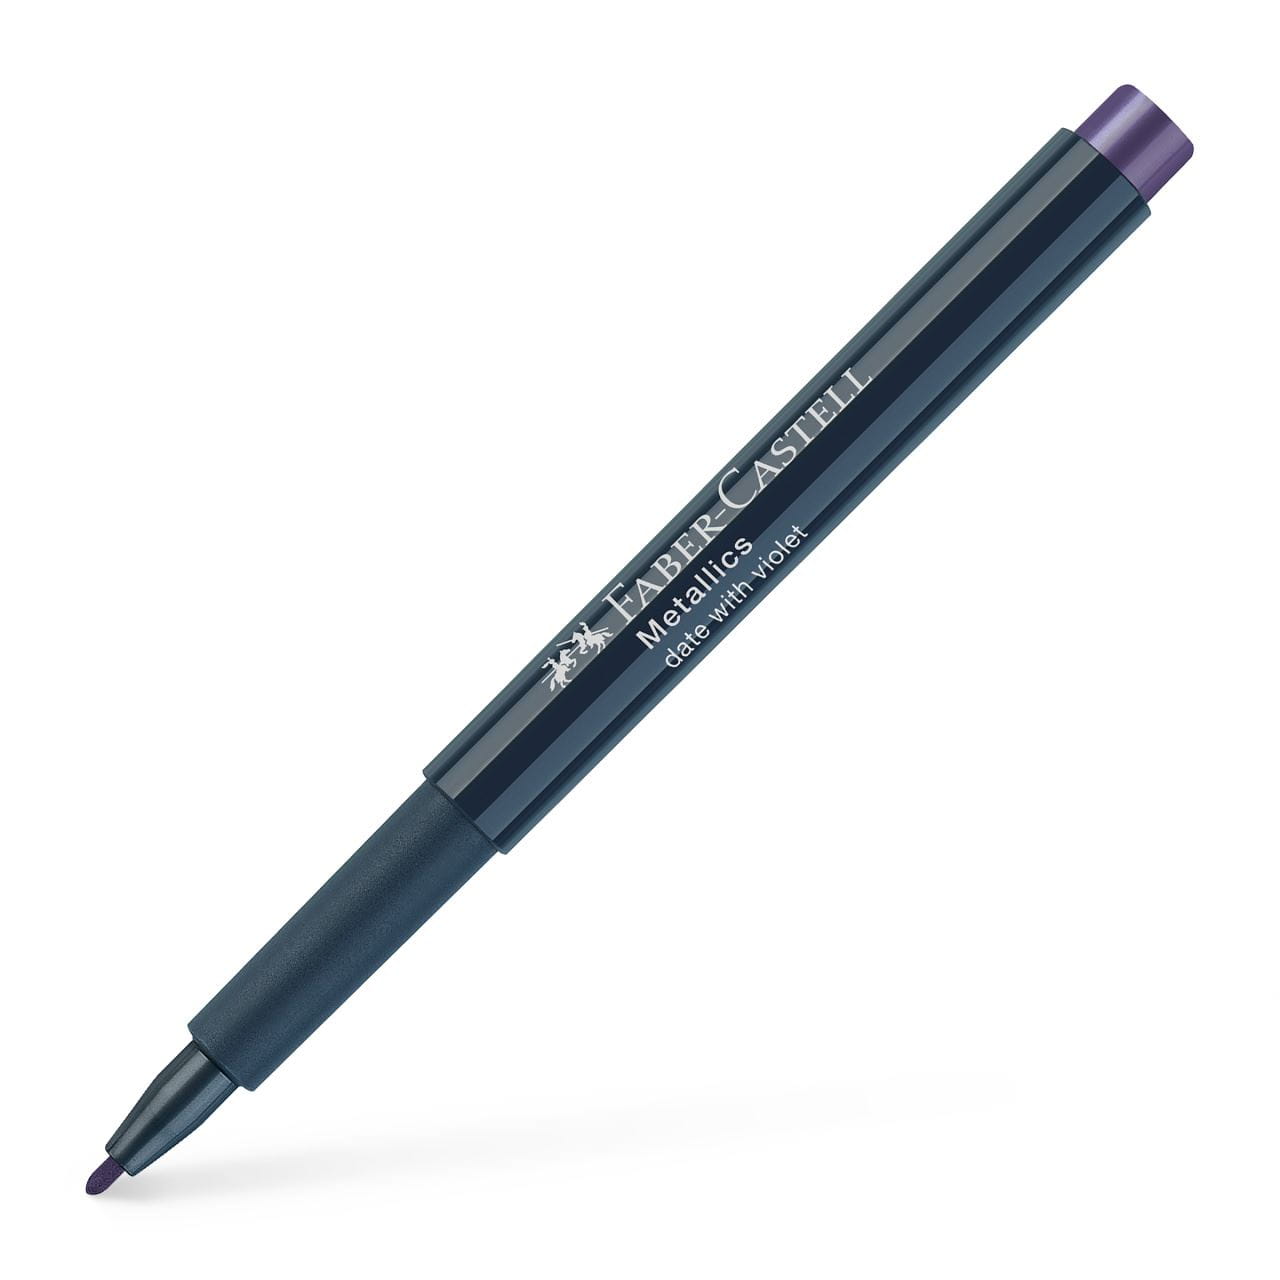 Faber-Castell - Popisovač Metallic, Date with violet